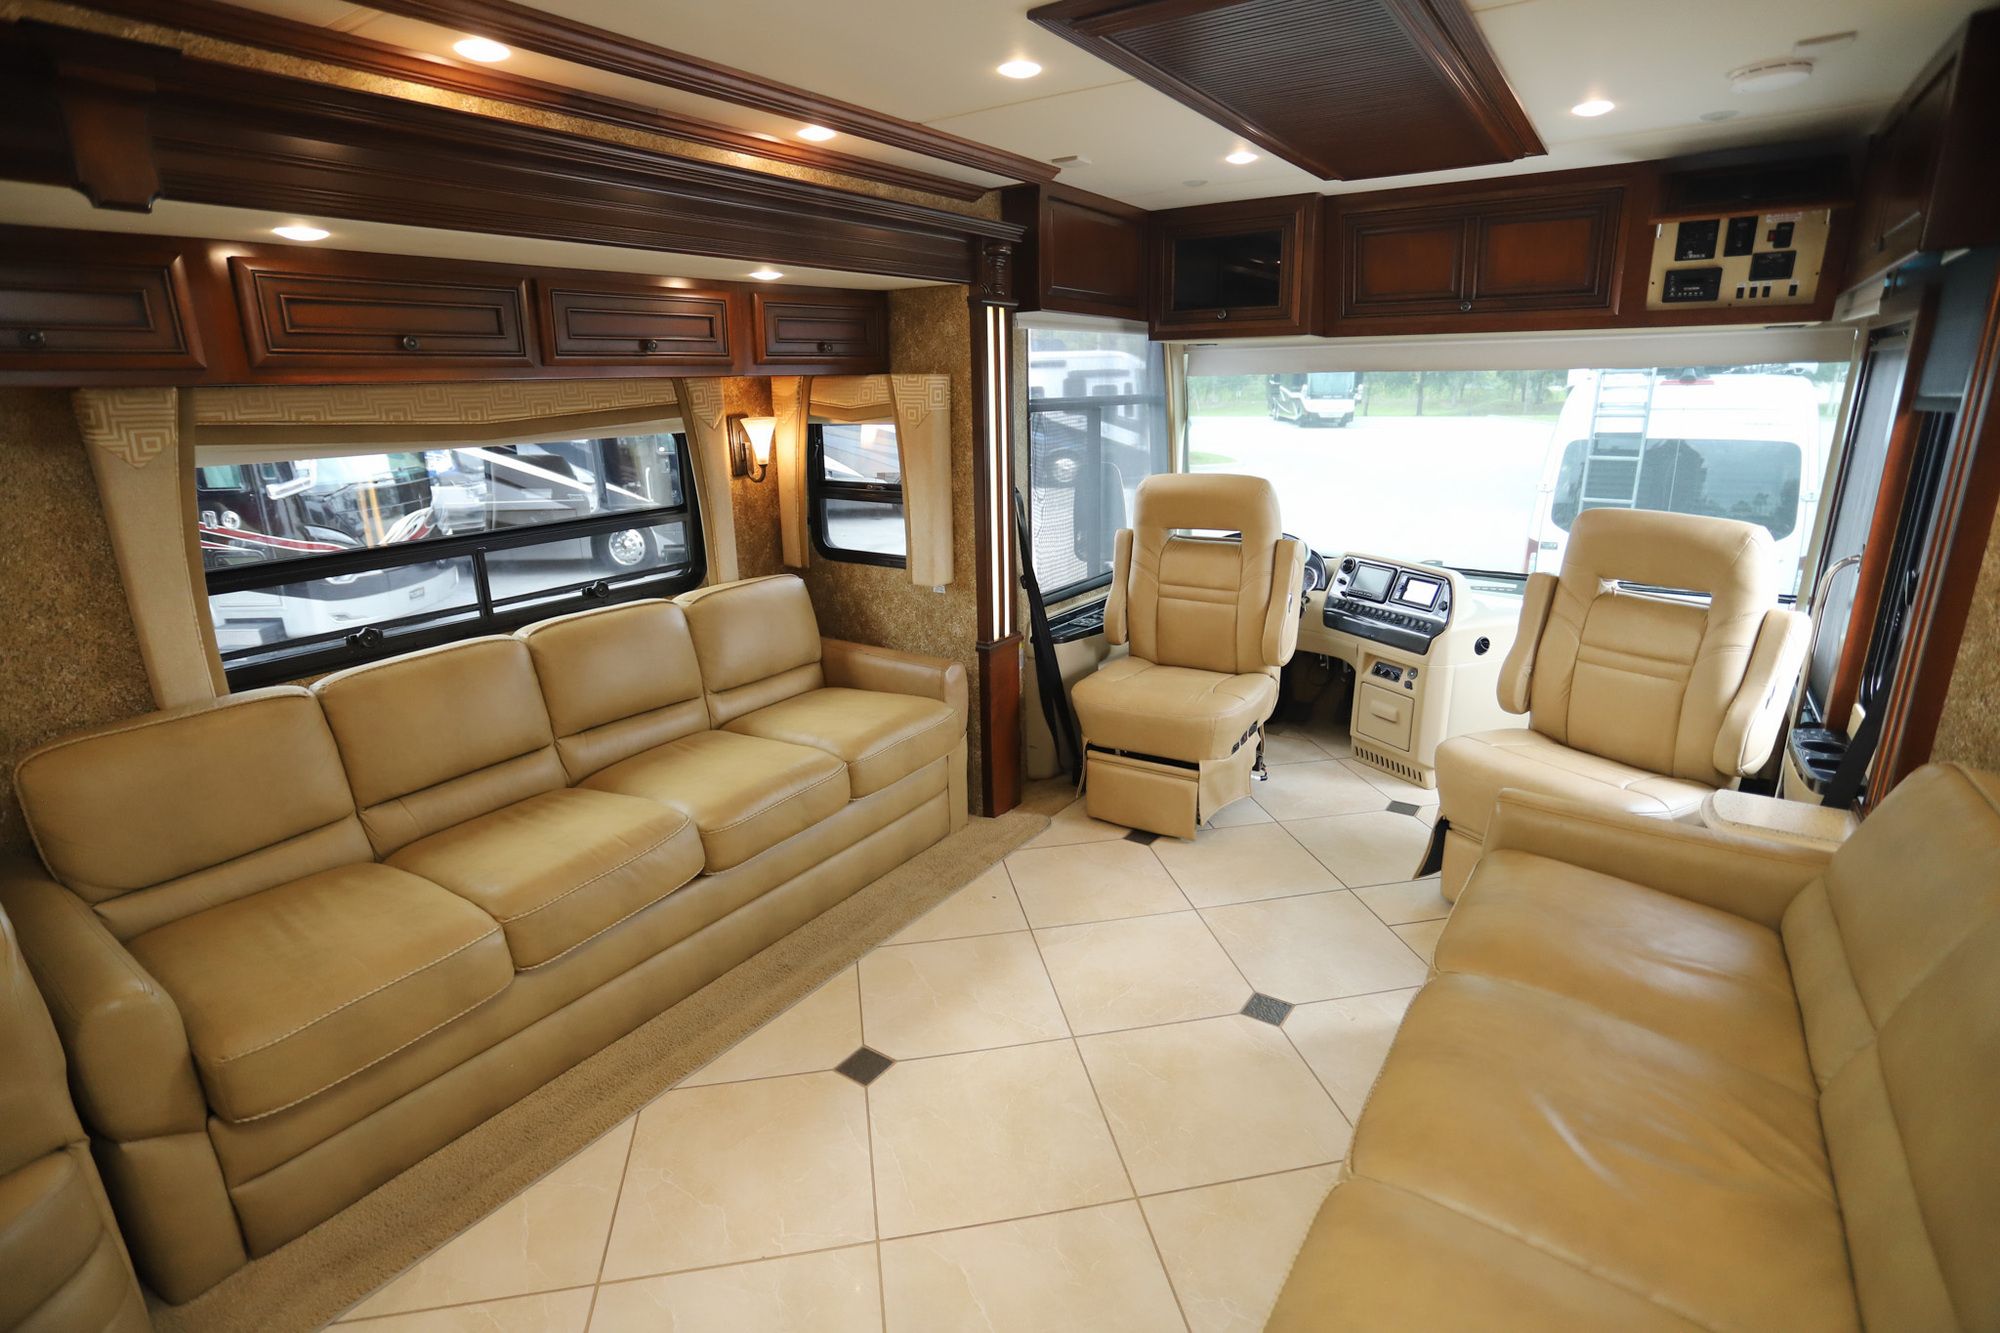 Used 2014 Newmar Dutch Star 4364 Class A  For Sale